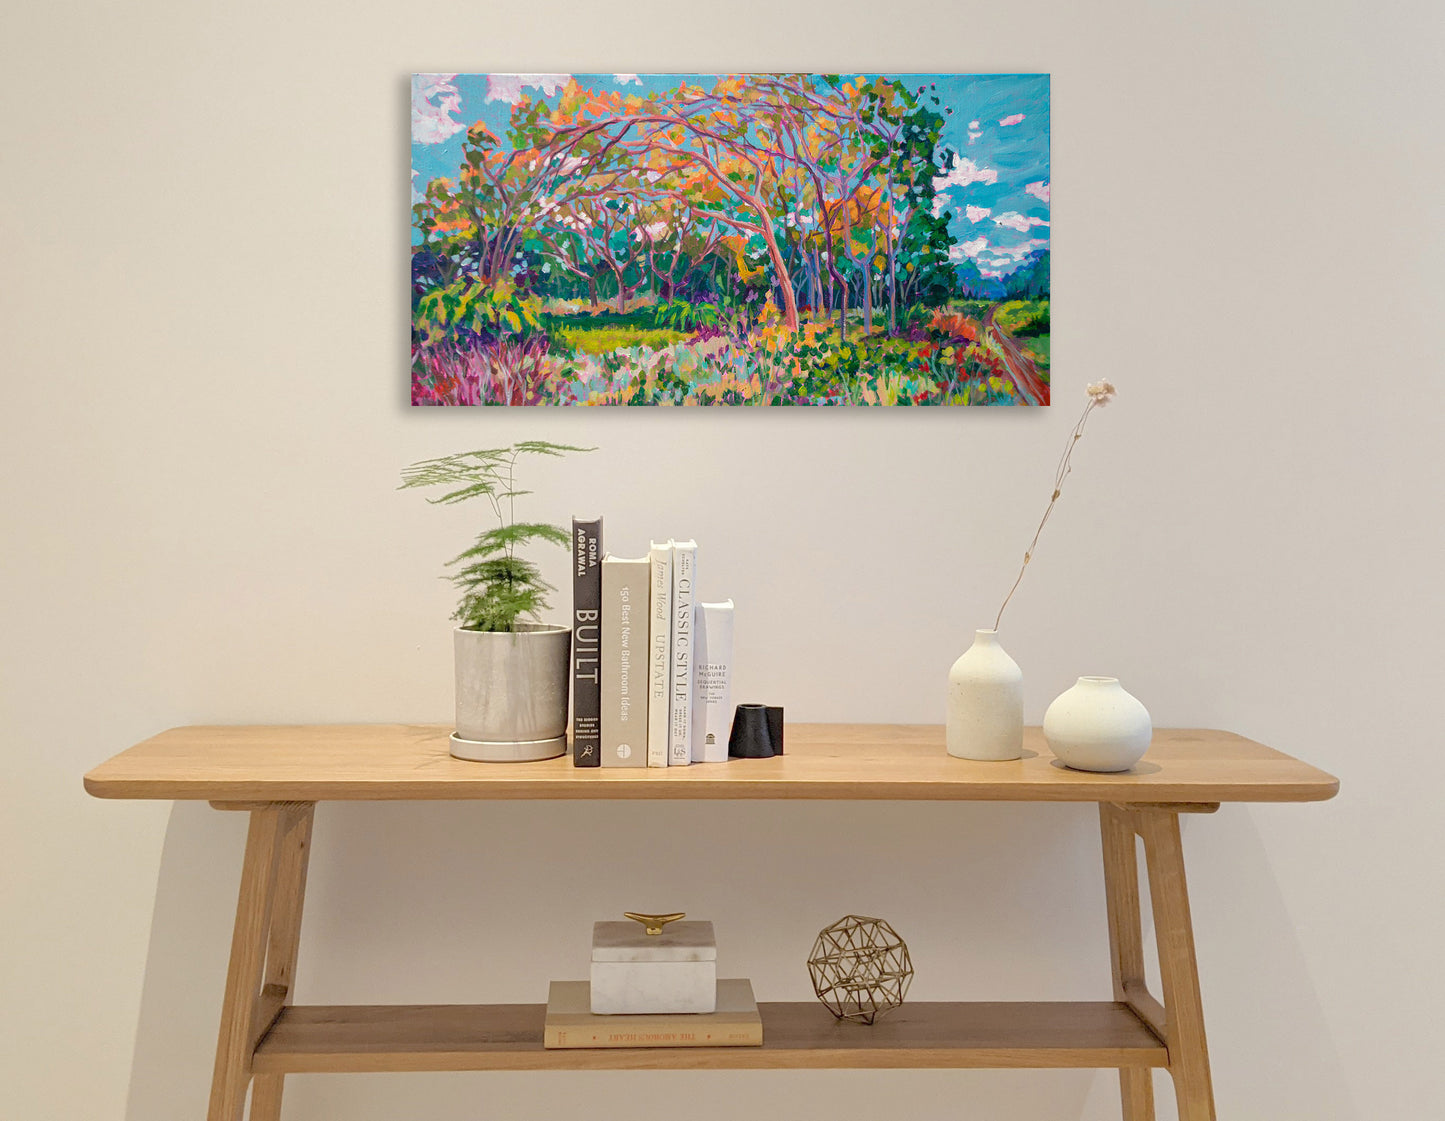 Painting on wall with shelf: Original vibrant impressionist landscape painting of tree branches meeting overhead